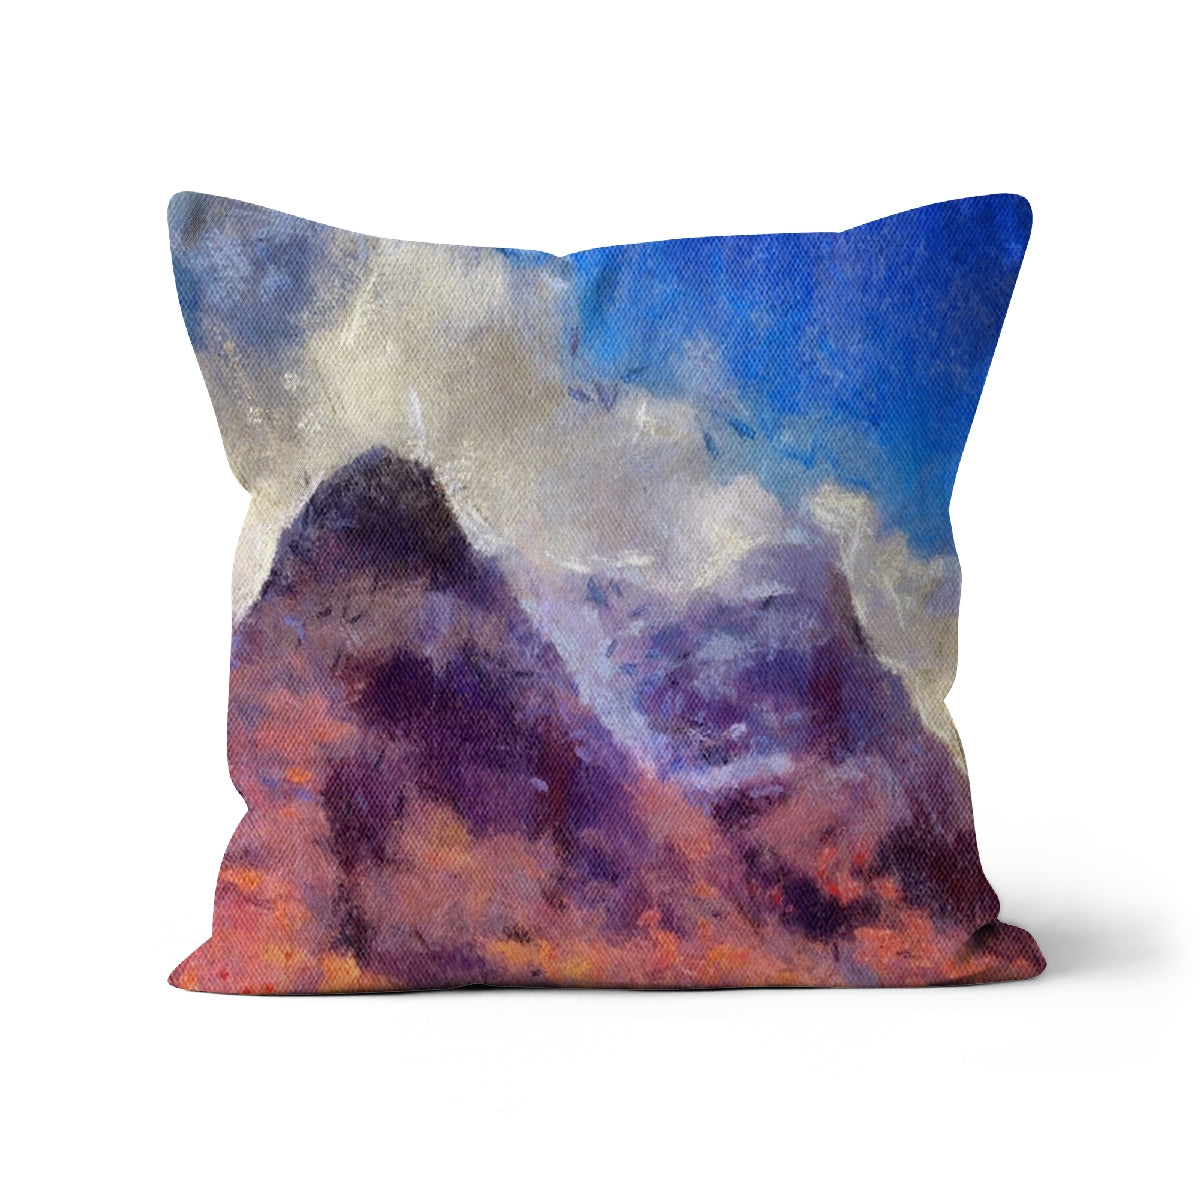 Glencoe Art Gifts Cushion-Cushions-Glencoe Art Gallery-Faux Suede-22"x22"-Paintings, Prints, Homeware, Art Gifts From Scotland By Scottish Artist Kevin Hunter